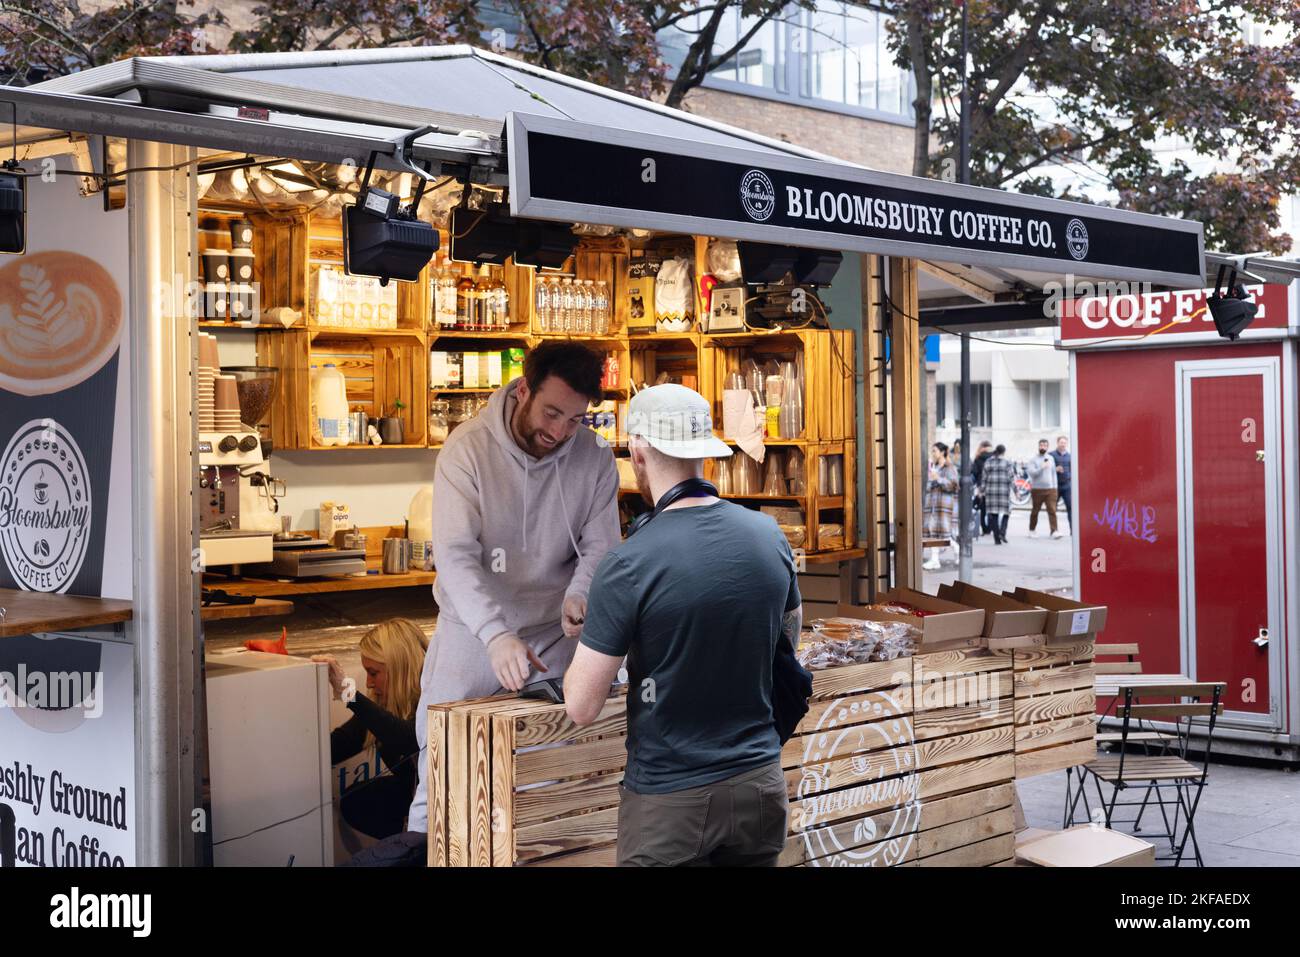 Small business UK; London coffee bar - a mobile street coffee stall outside, serving takeaway coffee, Bloomsbury, London UK Stock Photo